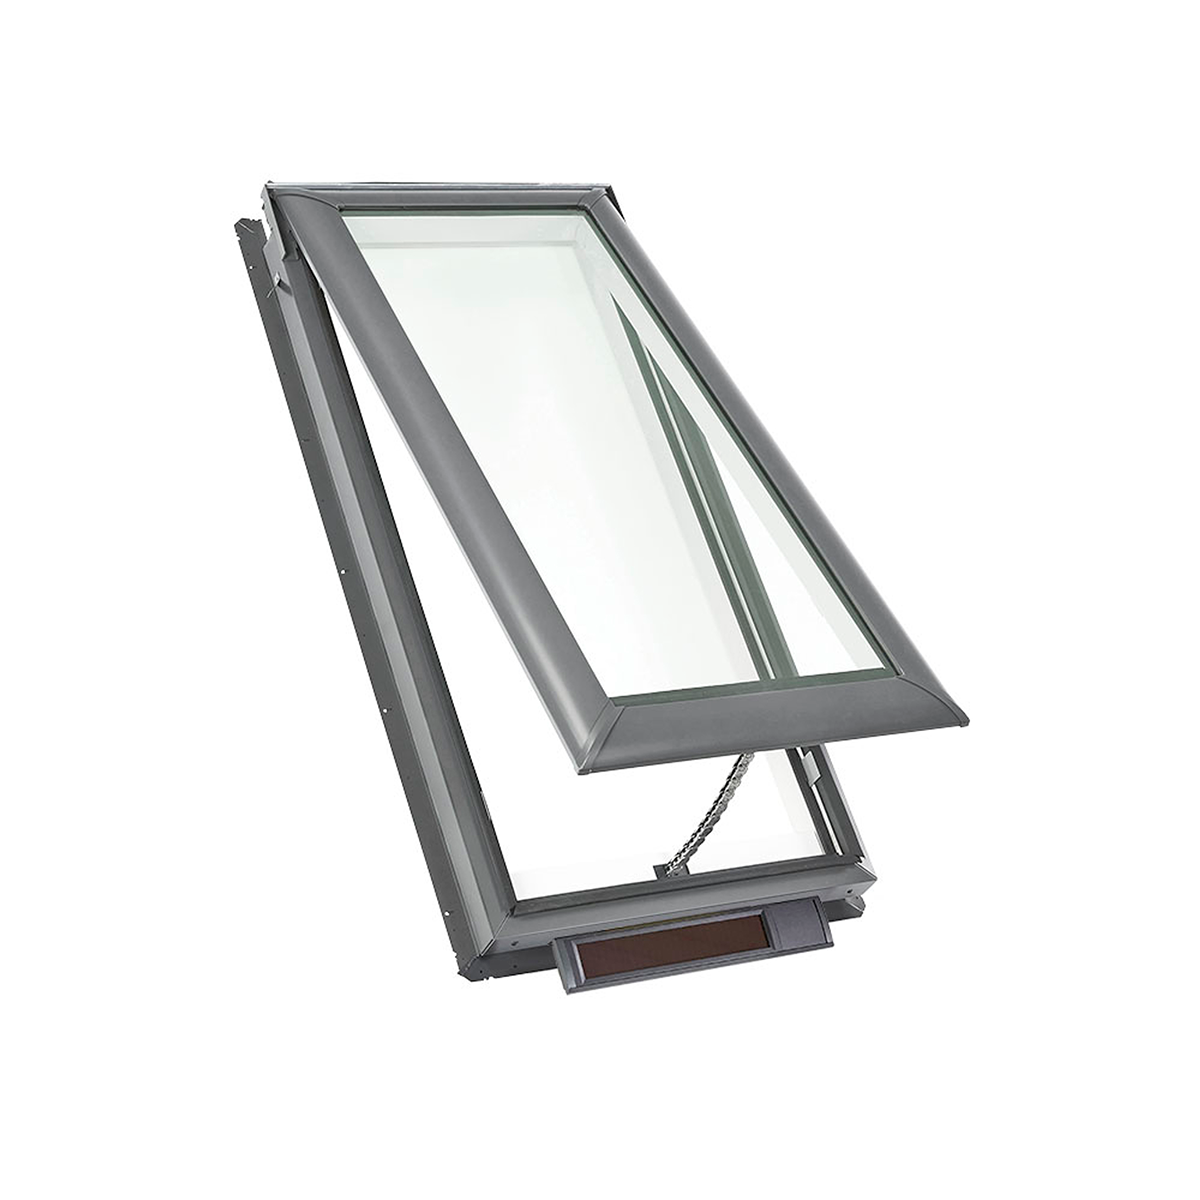 Solar Powered Deck-Mount Skylight with Laminated Low-E3 Glass - 21 in. x 54-7/16 in. - VSS C08